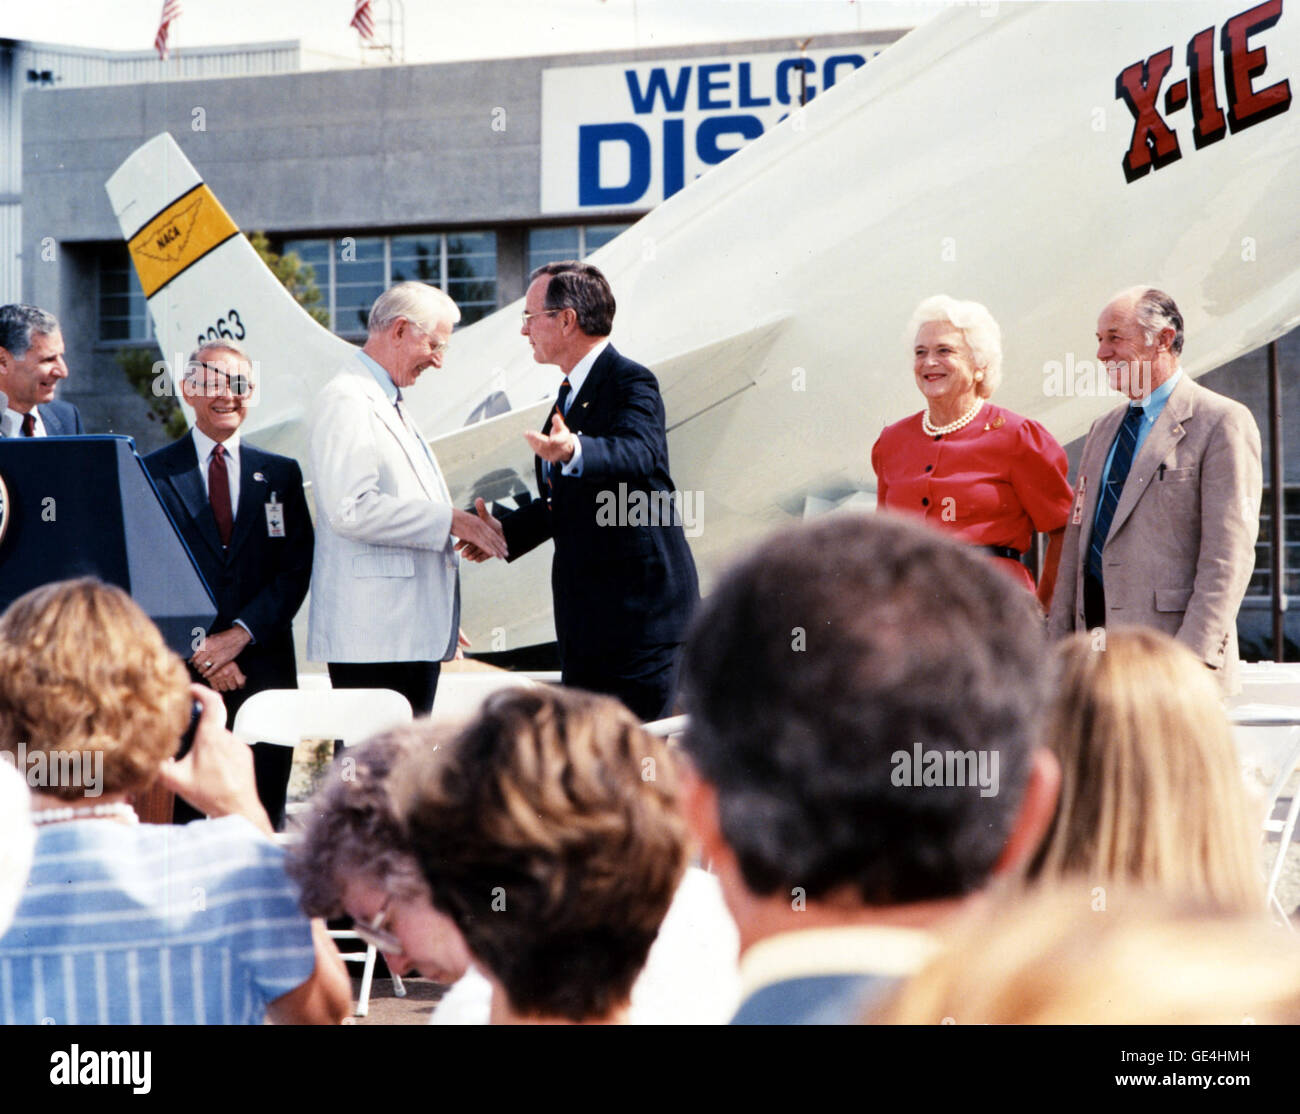 After a two-year hiatus, the STS-26 mission was NASA's return to spaceflight after the Challenger accident. Waiting to greet the STS-26 Discovery astronauts in front of the Dryden Headquarters building are, from left to right: California Governor George Deukmejian; NASA Deputy Administrator Dale Myers; NASA Administrator Dr. James C. Fletcher; Vice President George Bush; Barbara Bush; Brig. Gen (Ret) Charles Yeager.   Image # : 88-HC-516 Stock Photo